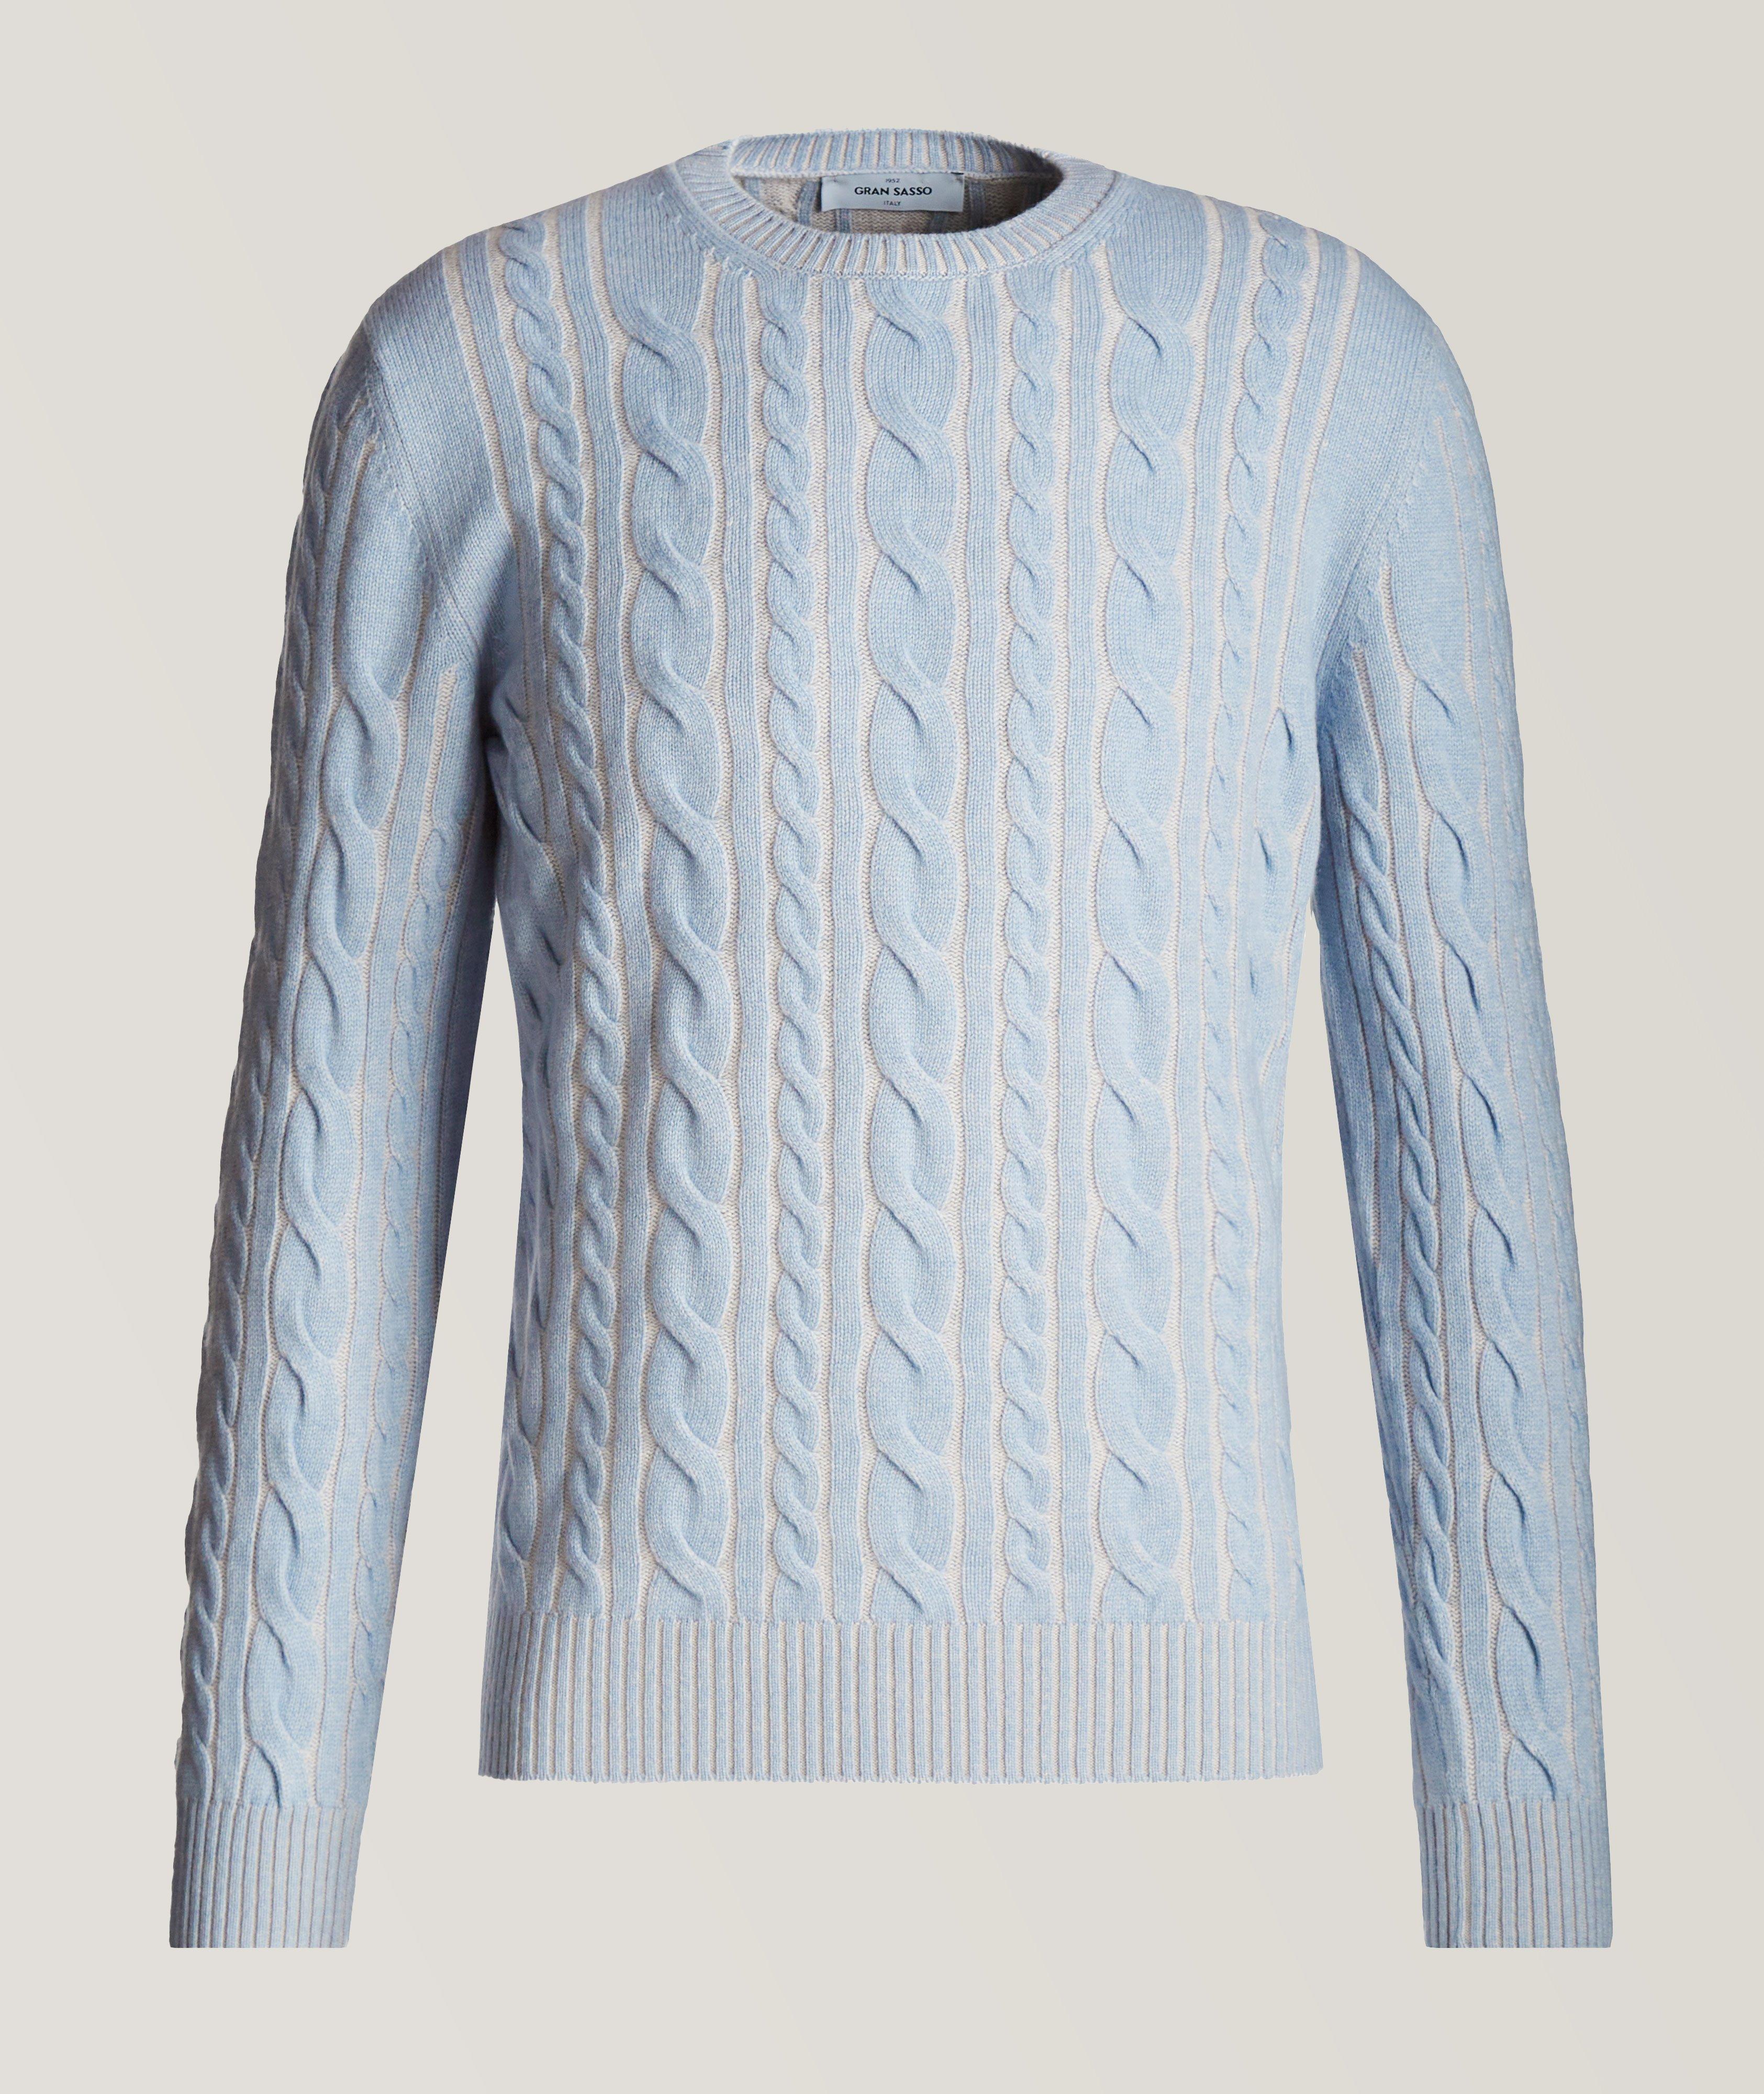 Wool-Cashmere Cable Knit Sweater image 0